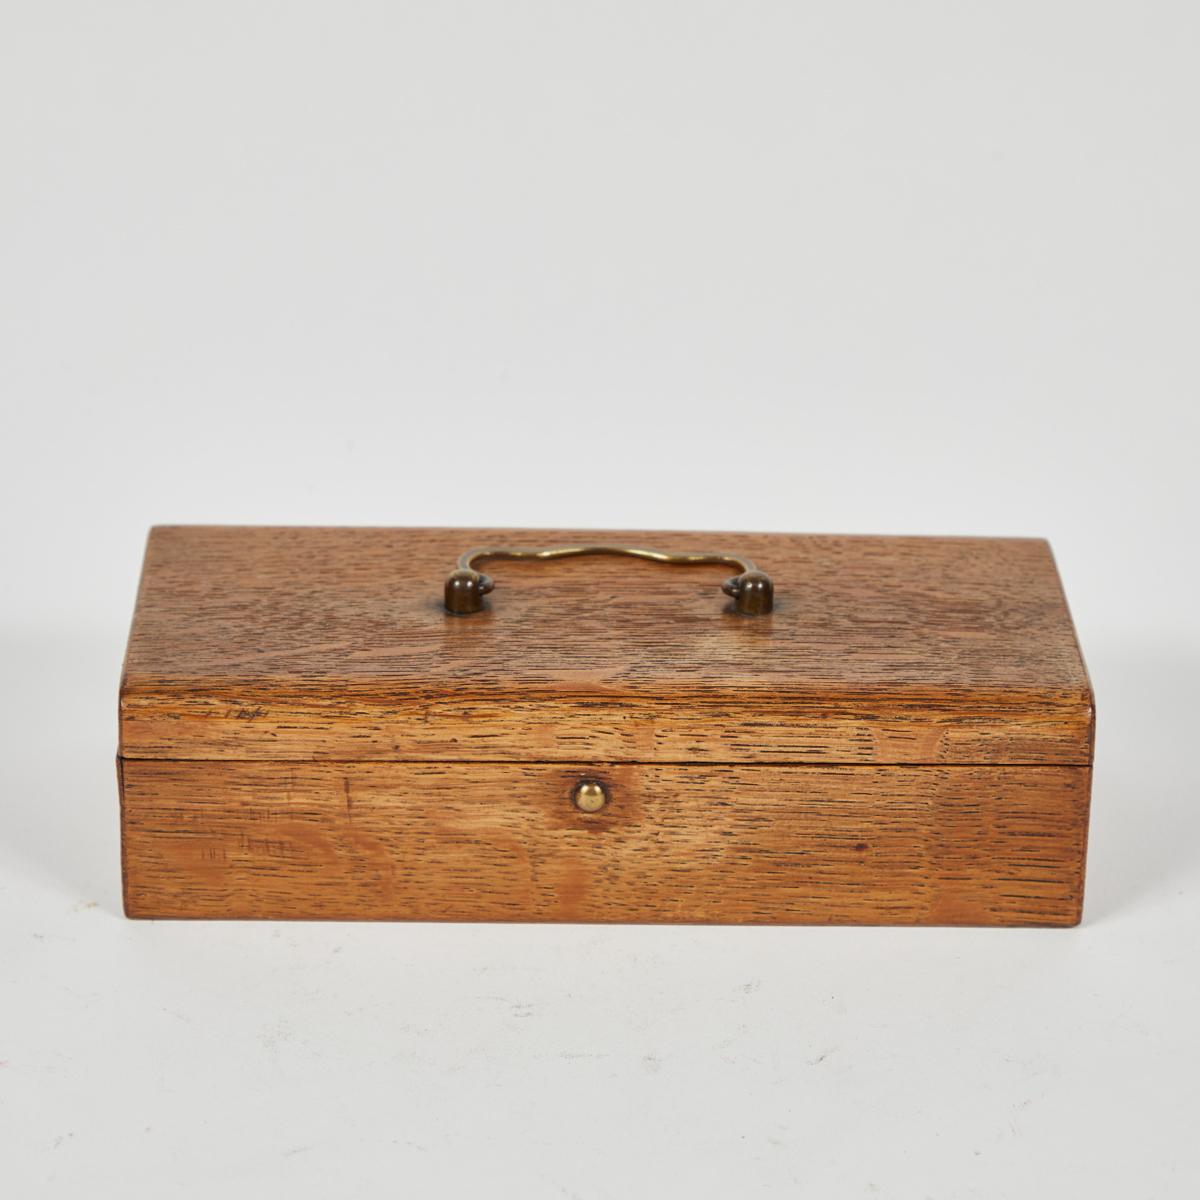 Small storage box for glasses from late 19th century England.